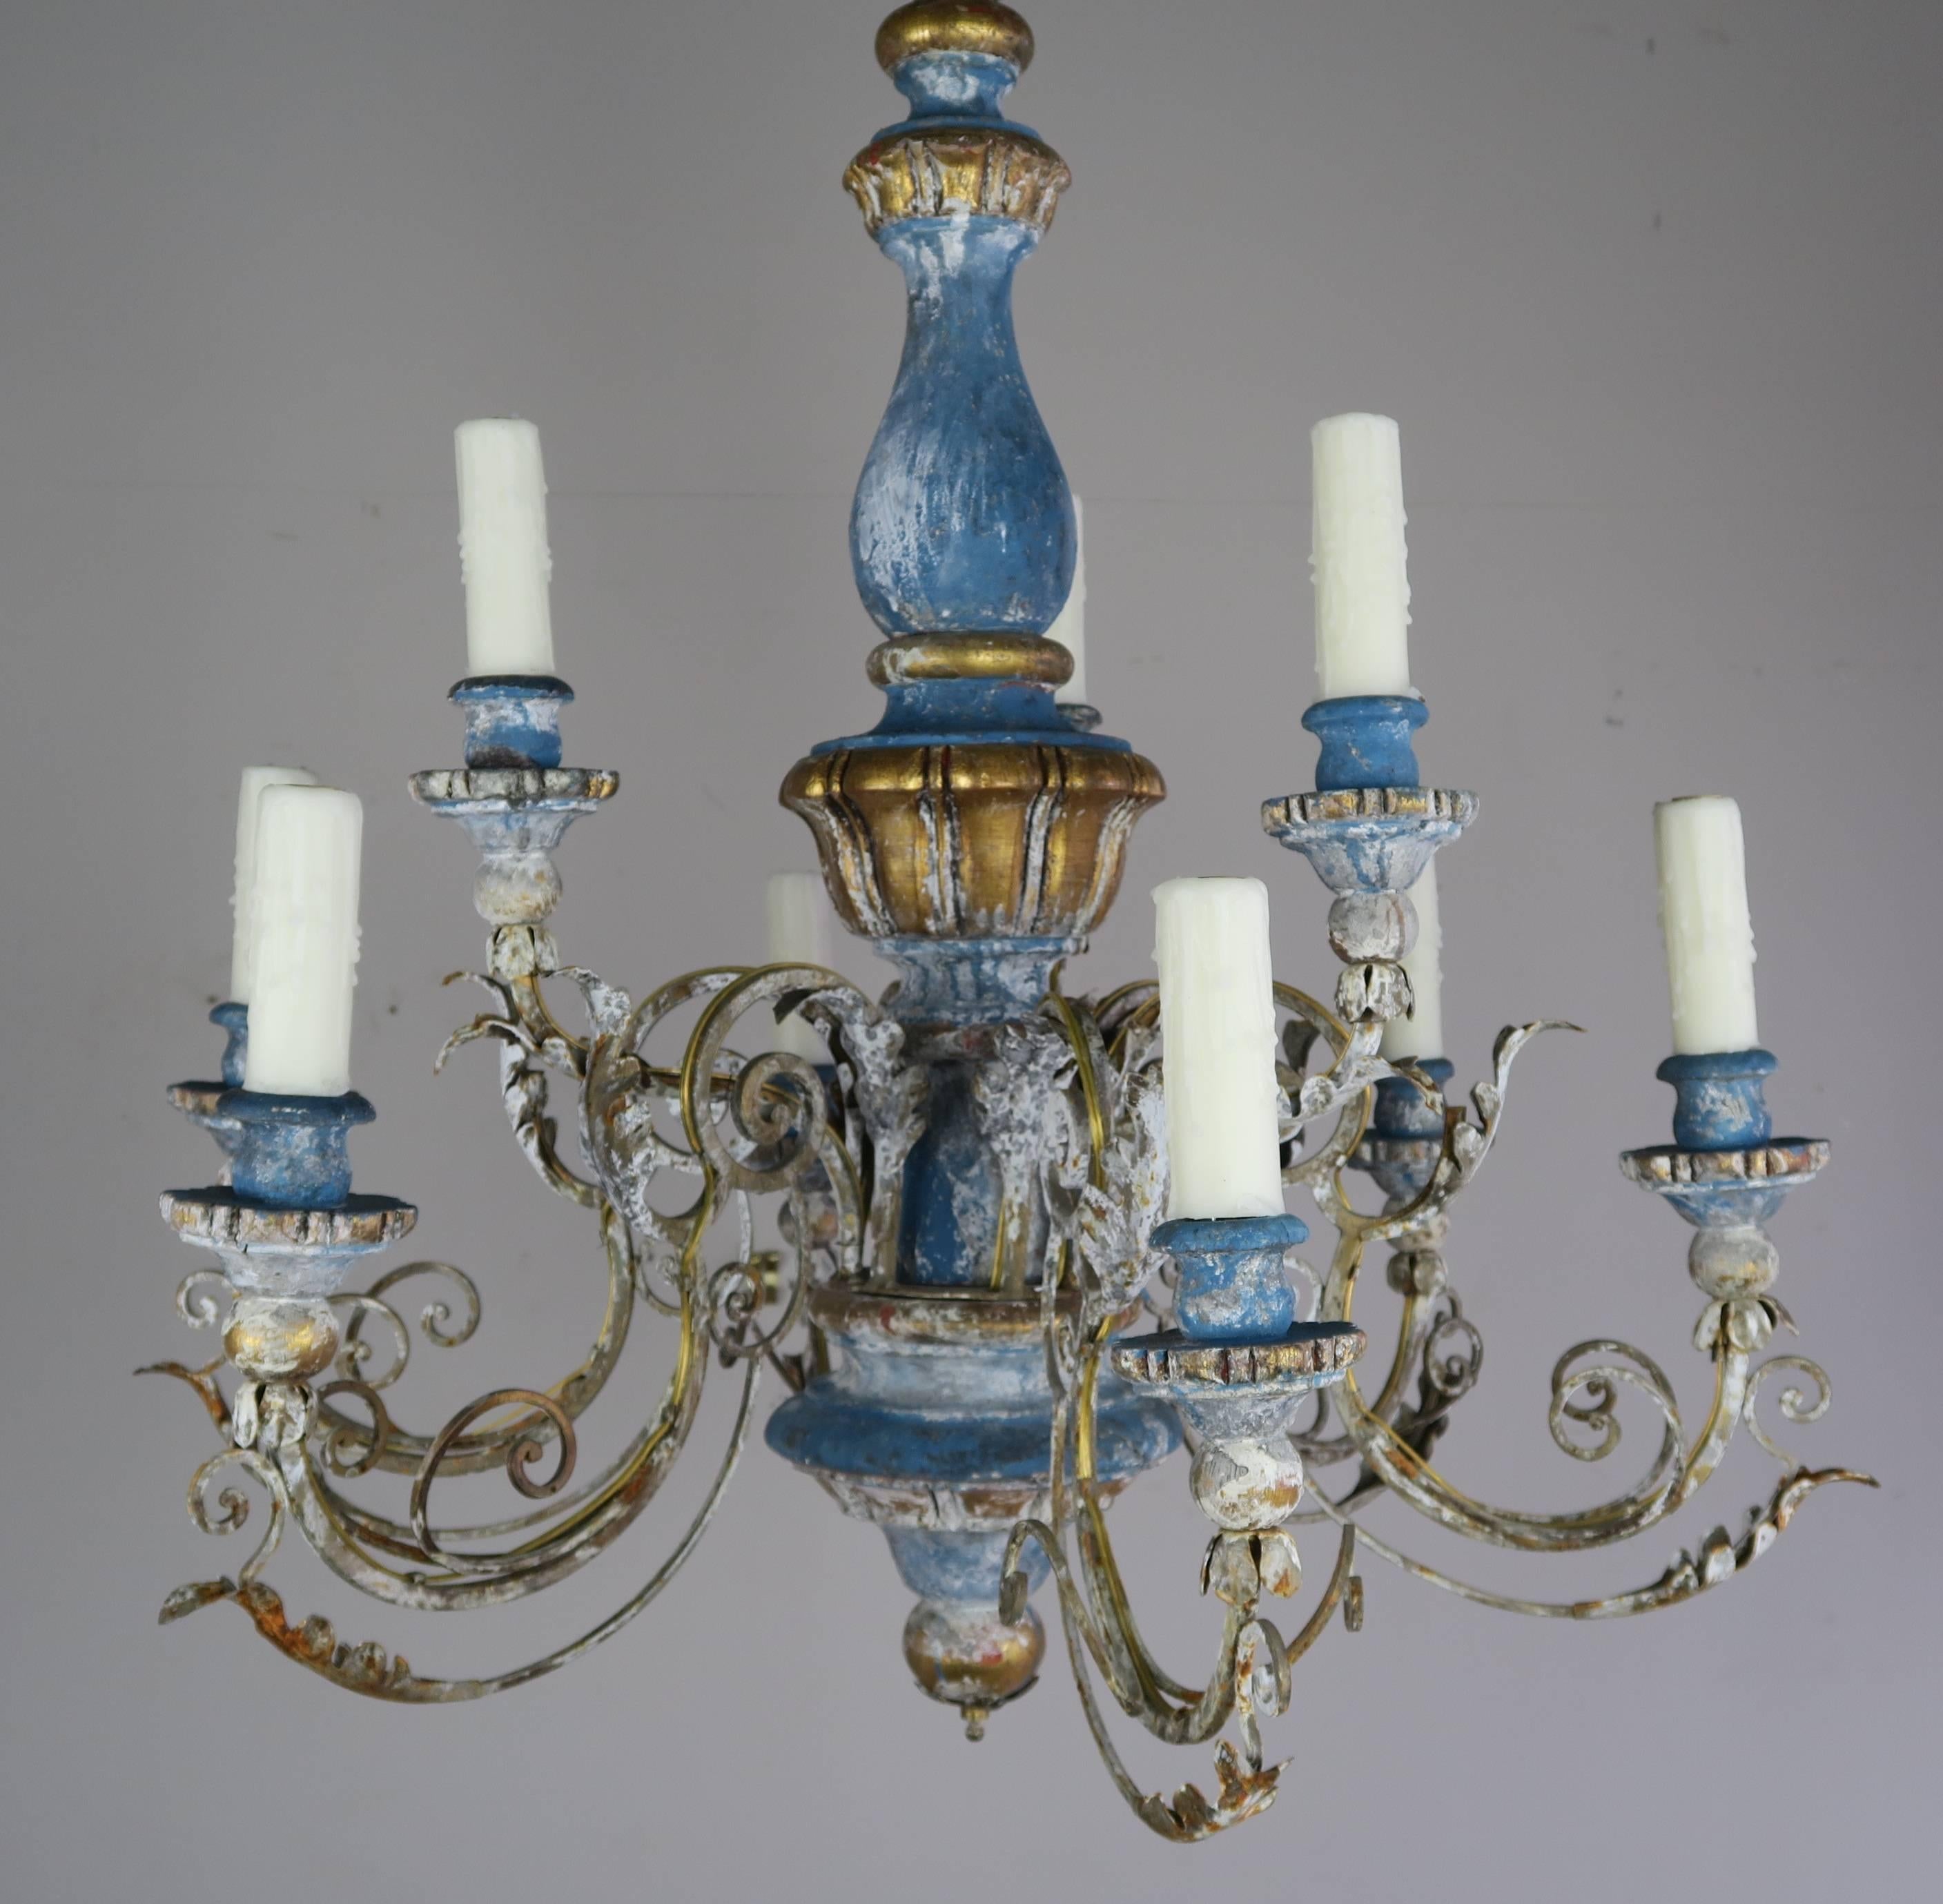 Italian blue painted and parcel-gilt chandelier. The metal arms are detailed with acanthus leaves and end in wood bobeches. The chandelier is newly rewired with drip wax candle covers. Chain and canopy included.